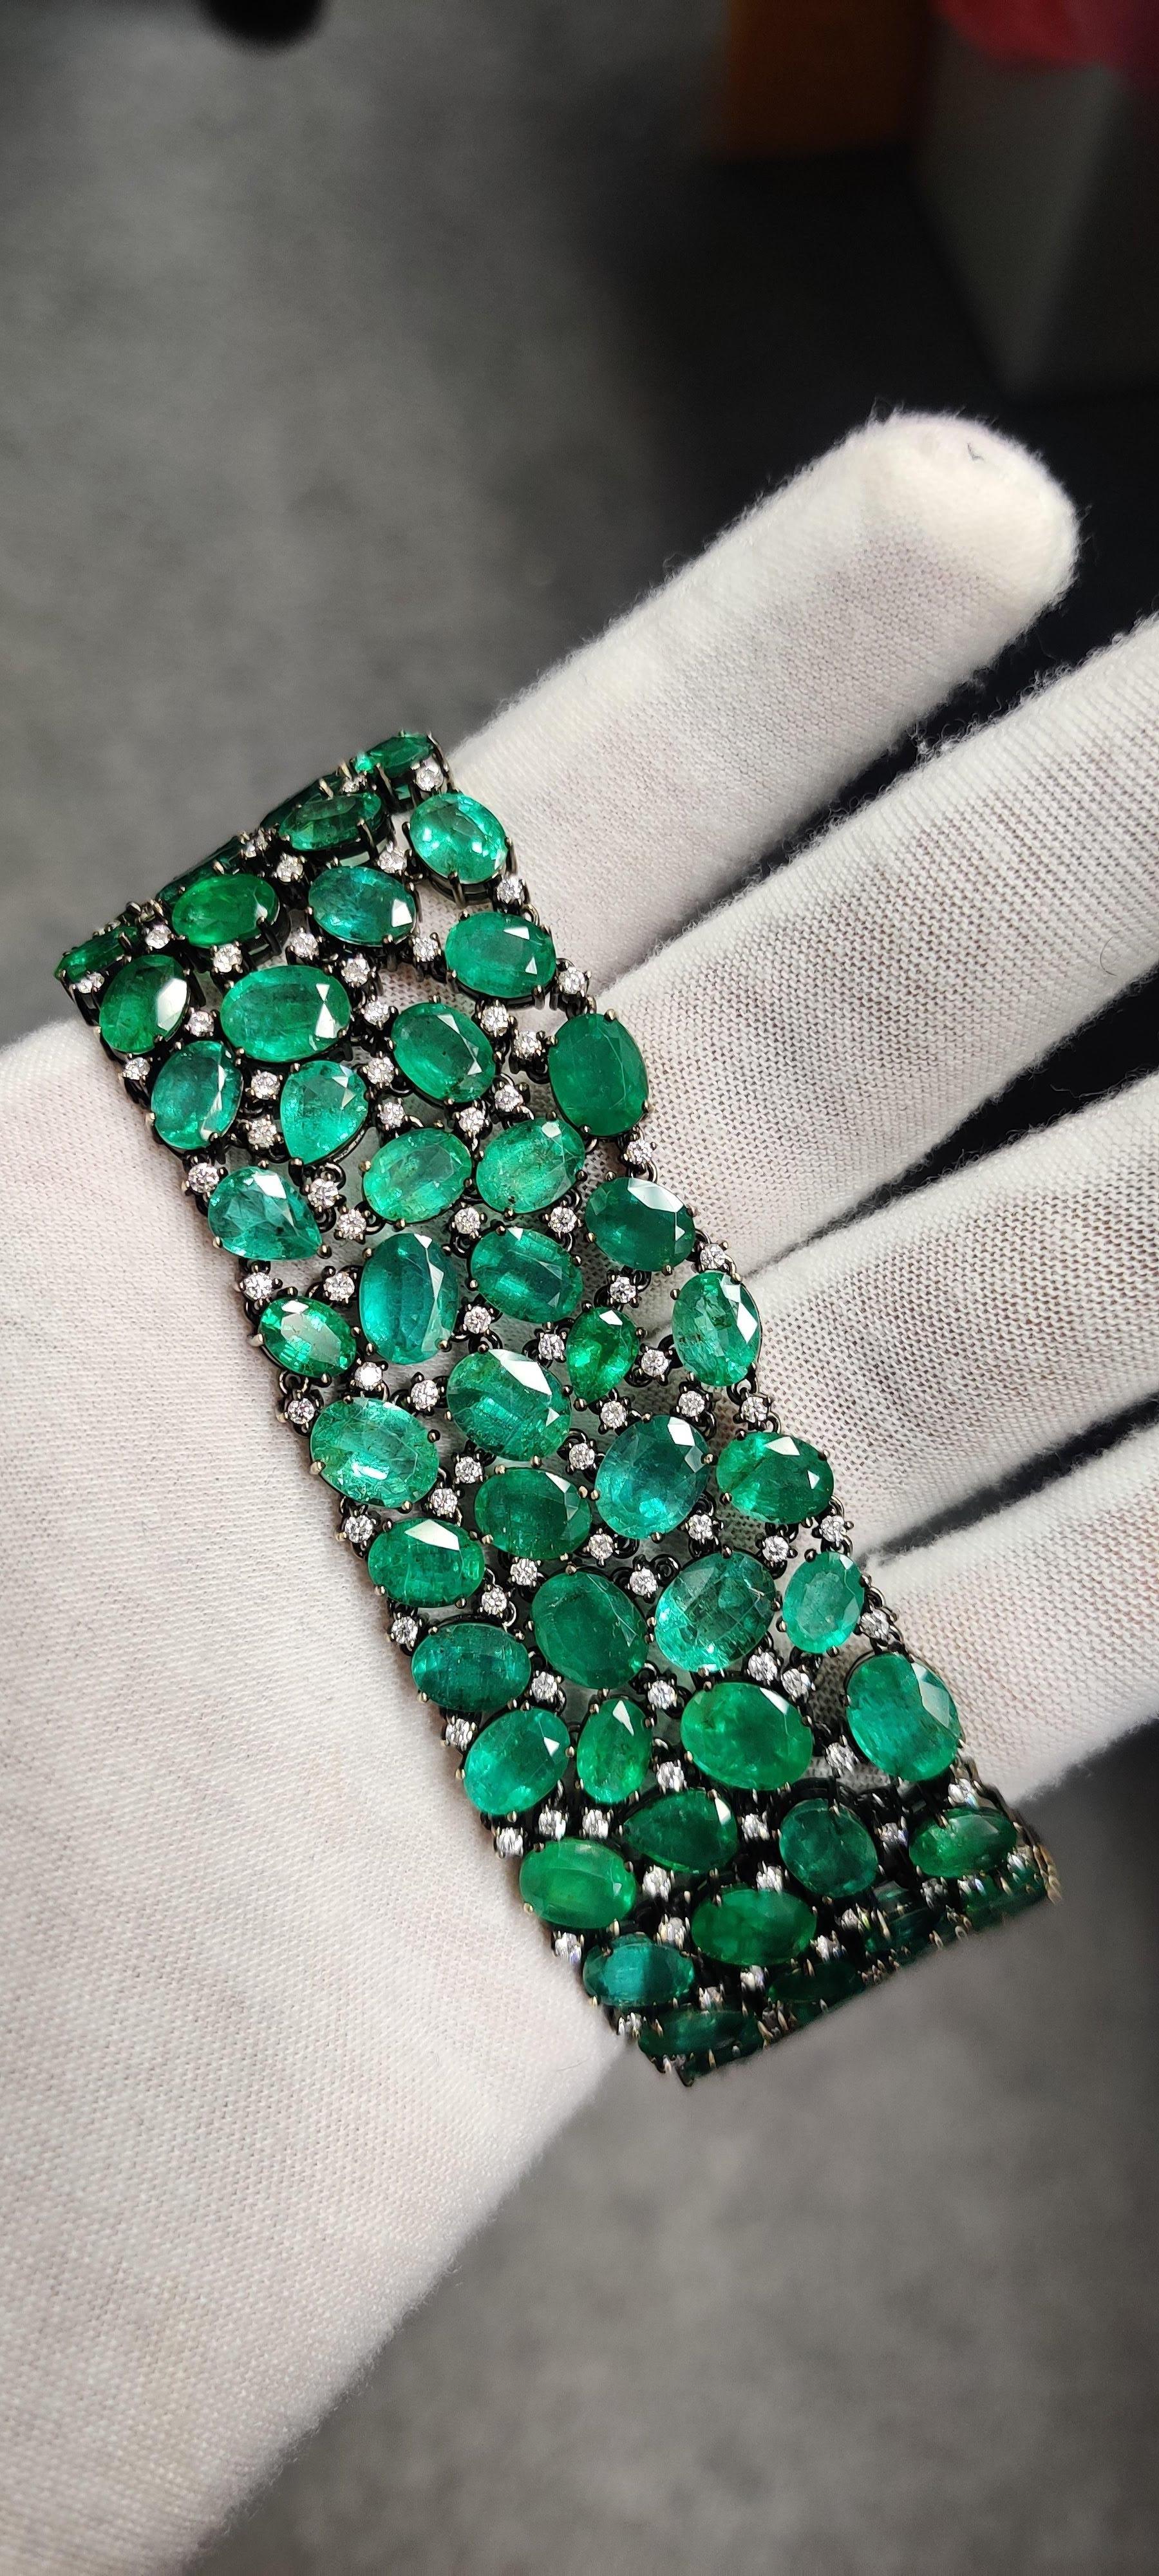 115.21 Ct Zambian Emerald studded Contemporary Statement Bracelet in 18K Gold For Sale 3